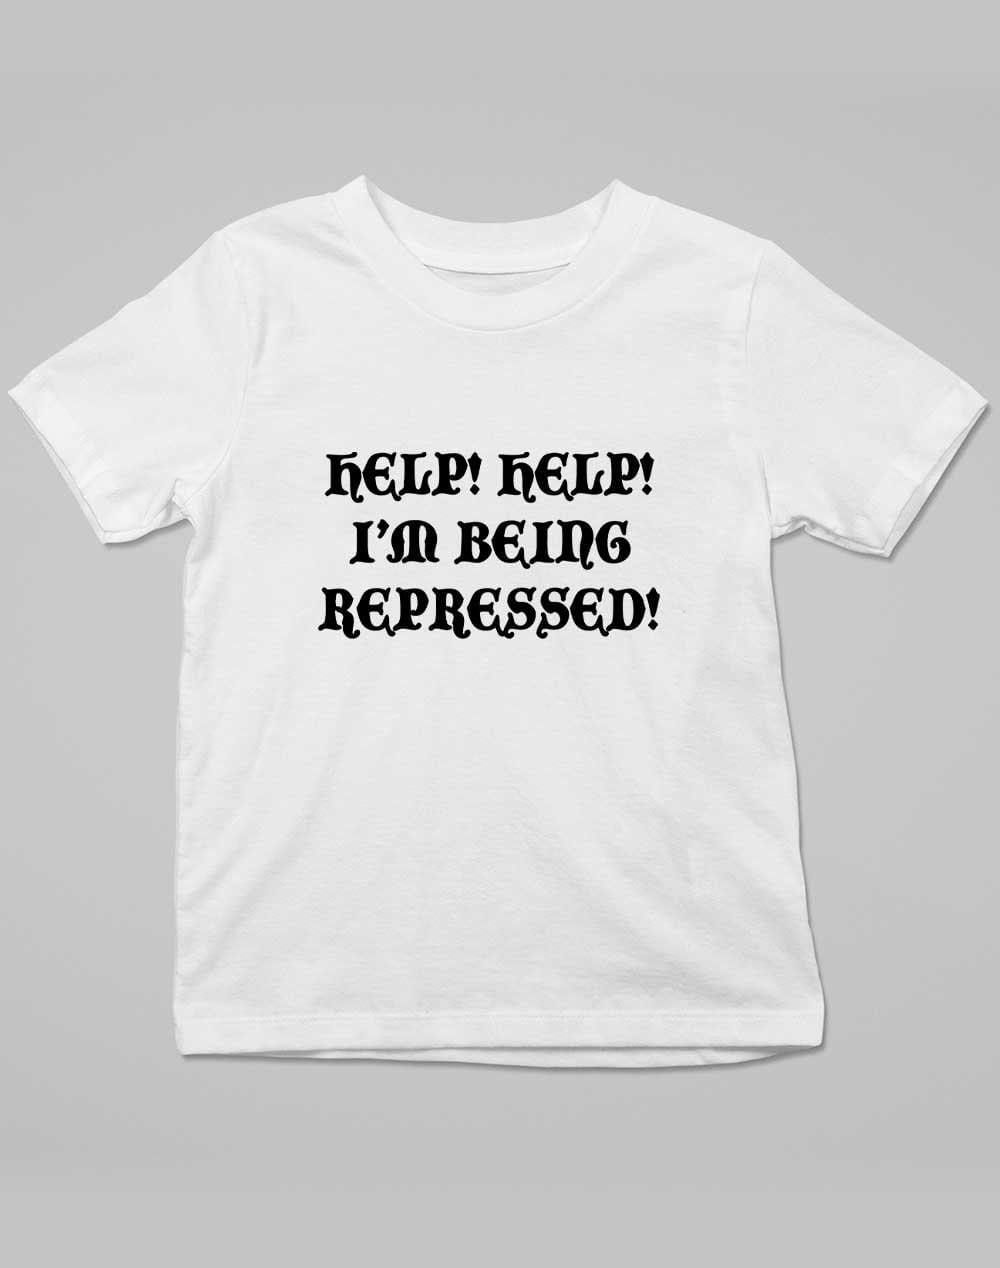 Help I'm Being Repressed Kids T-Shirt 3-4 years / White  - Off World Tees